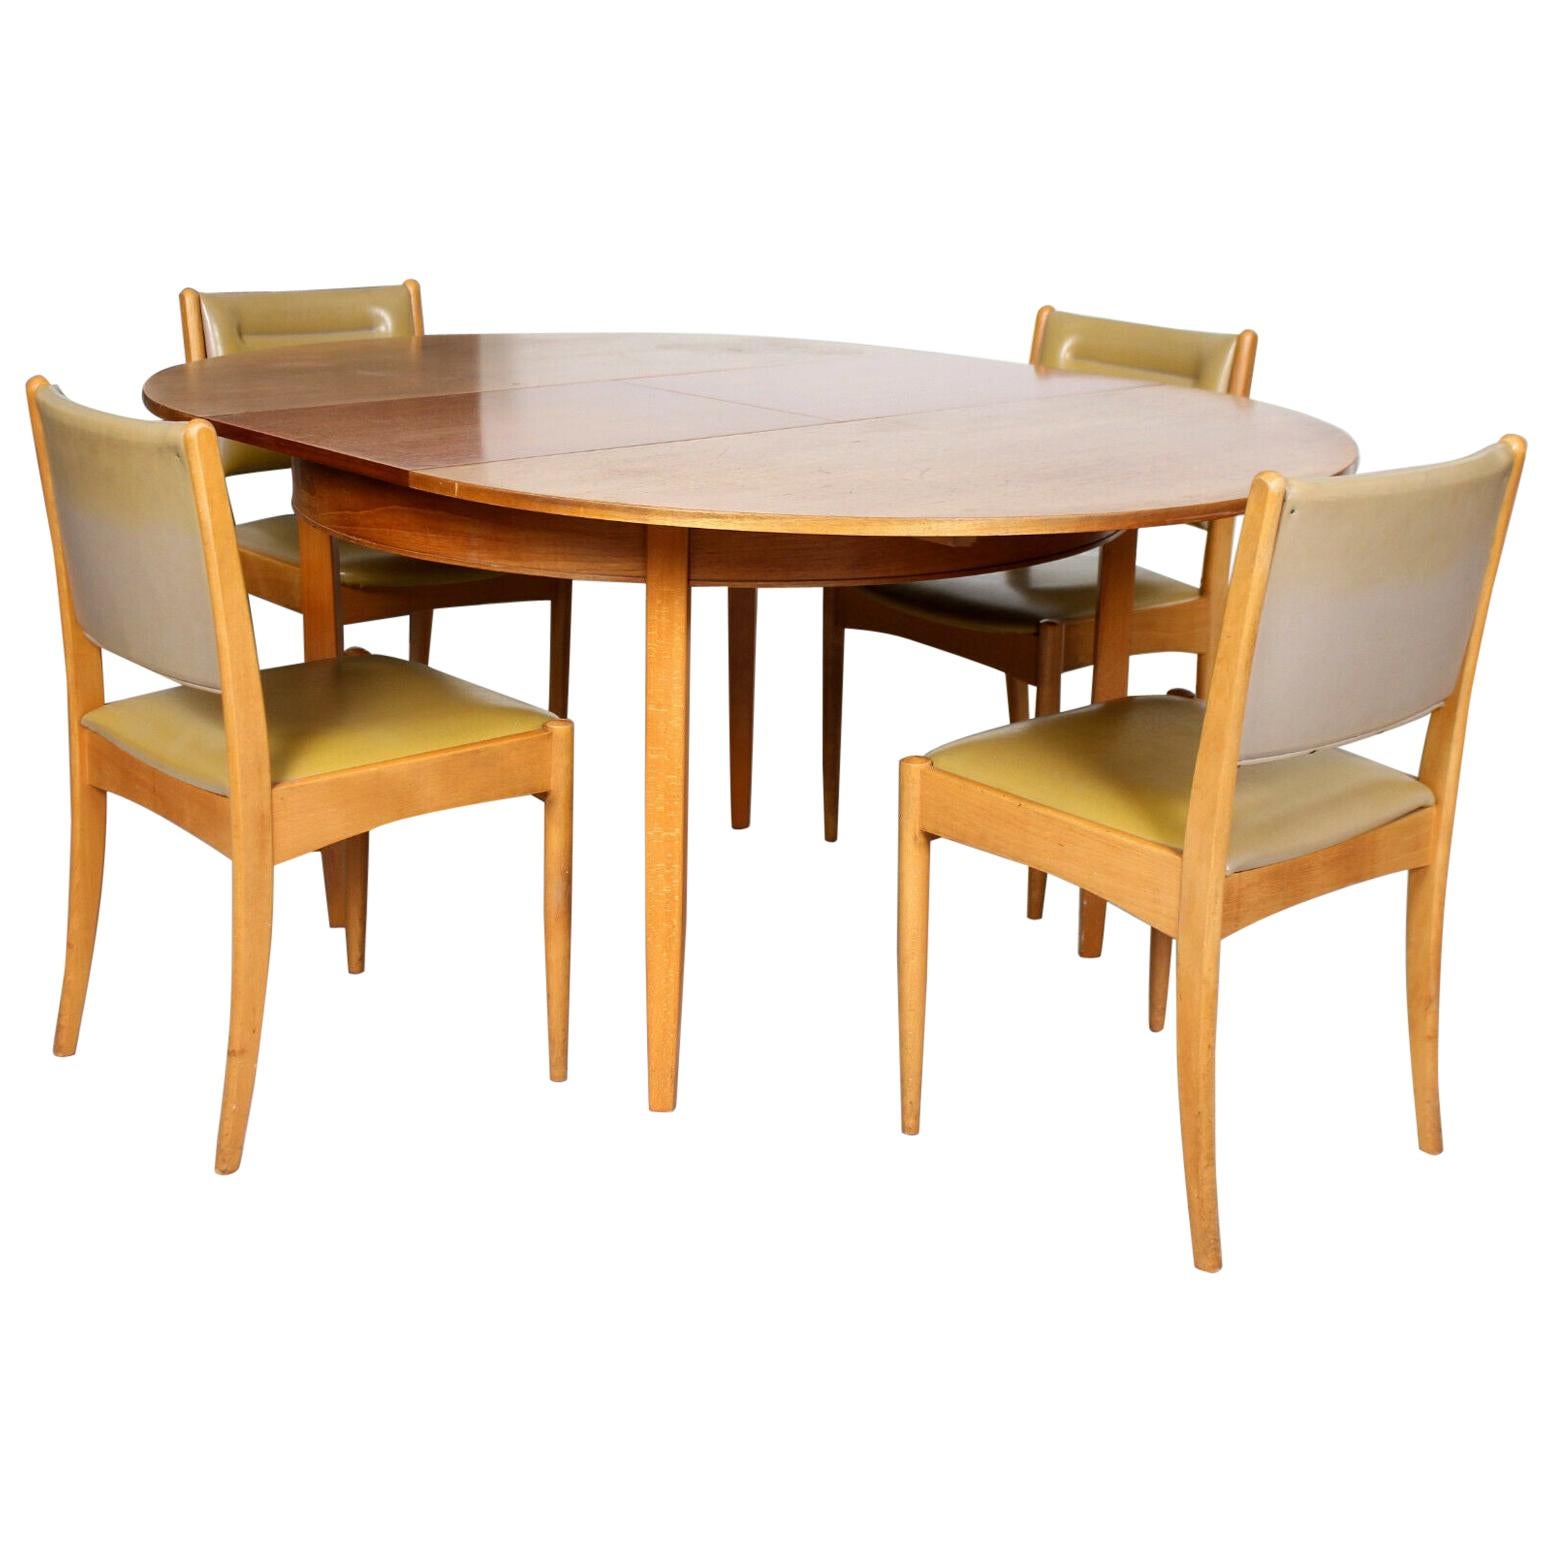 English Teak Dining Table and 4 Chairs